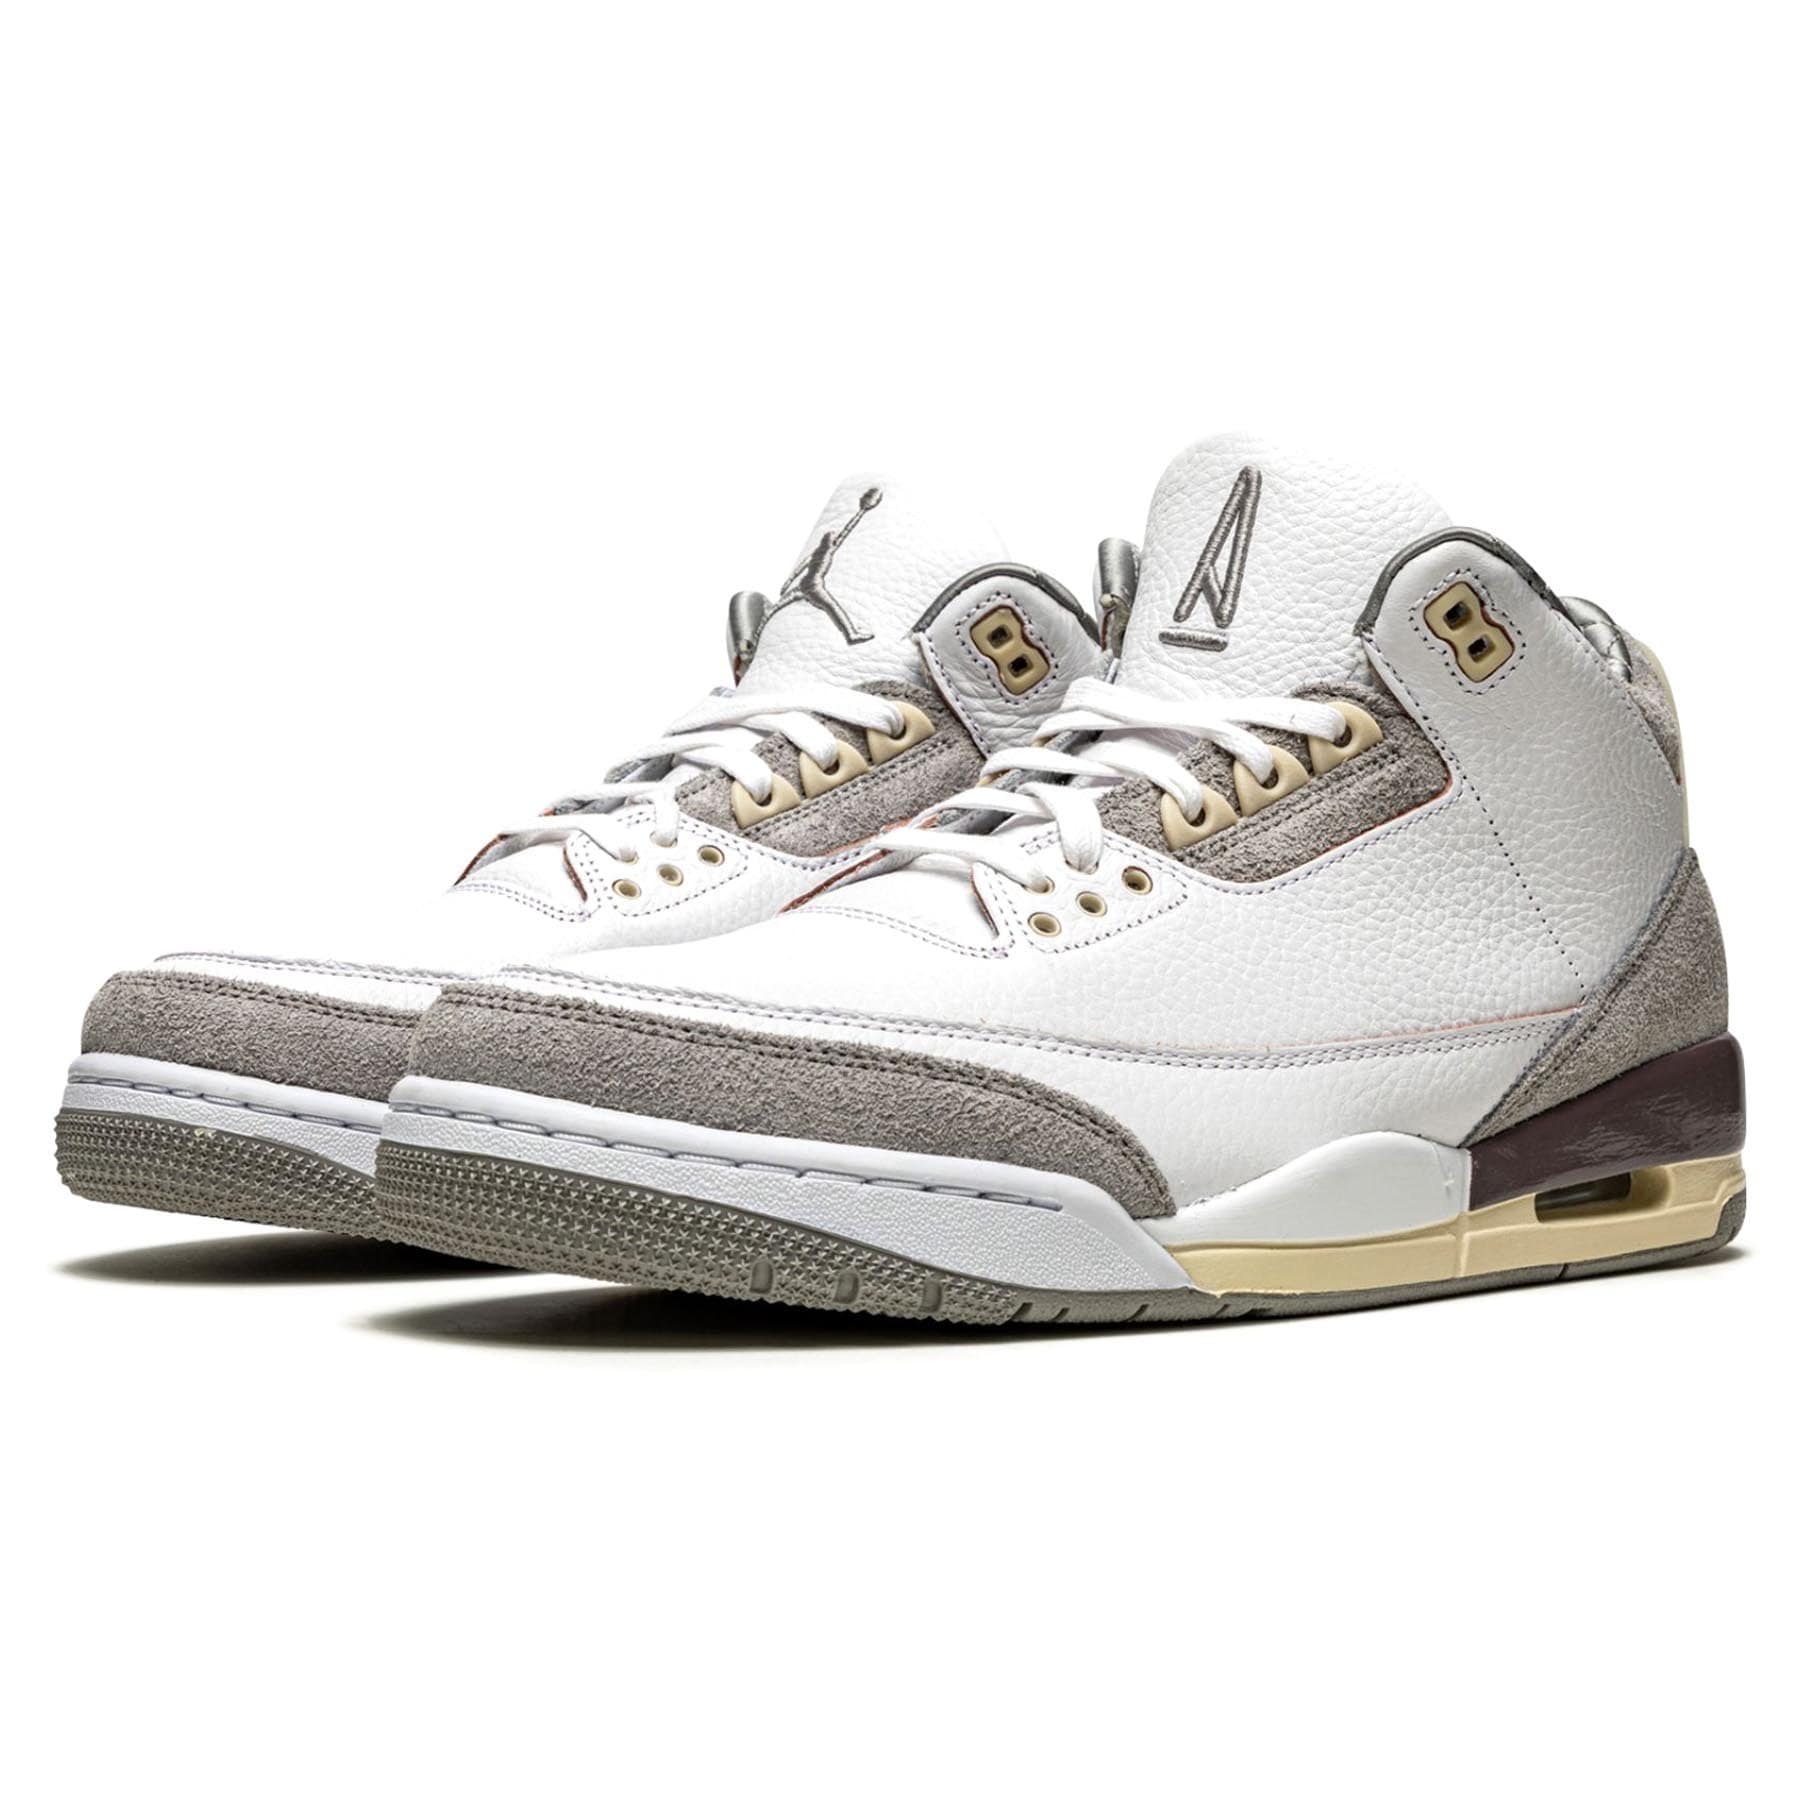 Air Ray Jordan Golden Moments Package